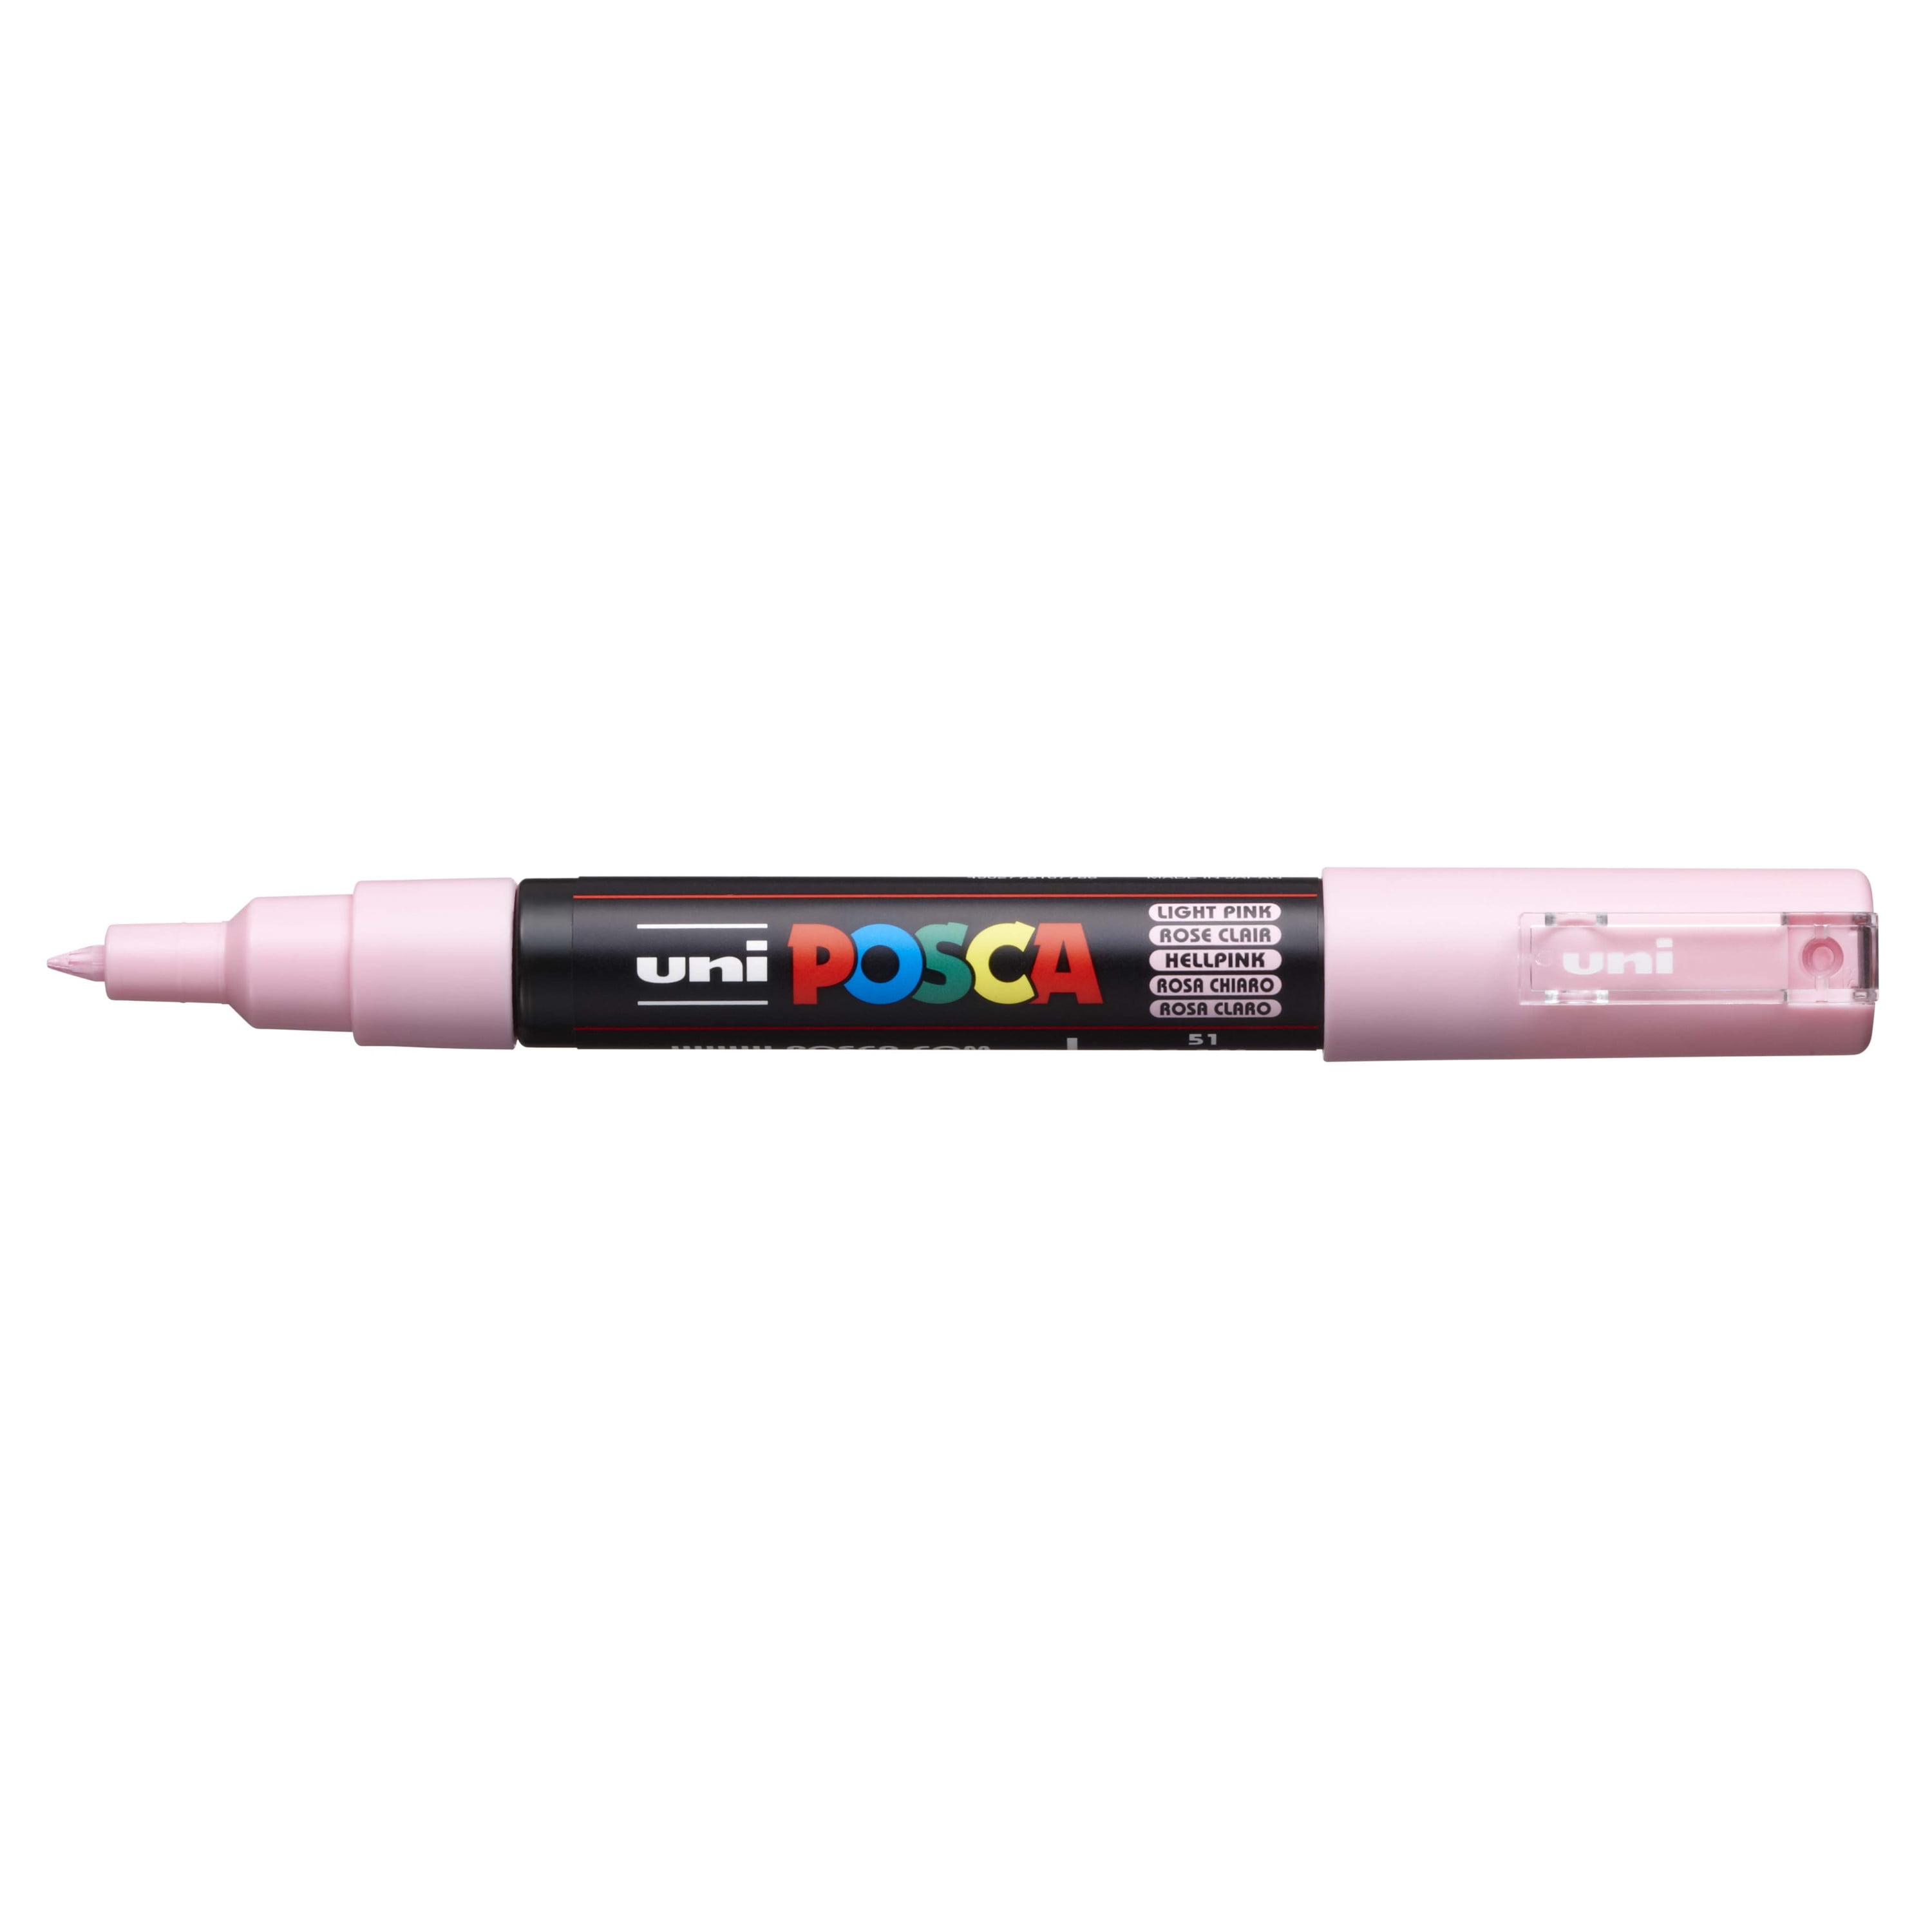 Metal Marker Extra Bold 10 mm Pink